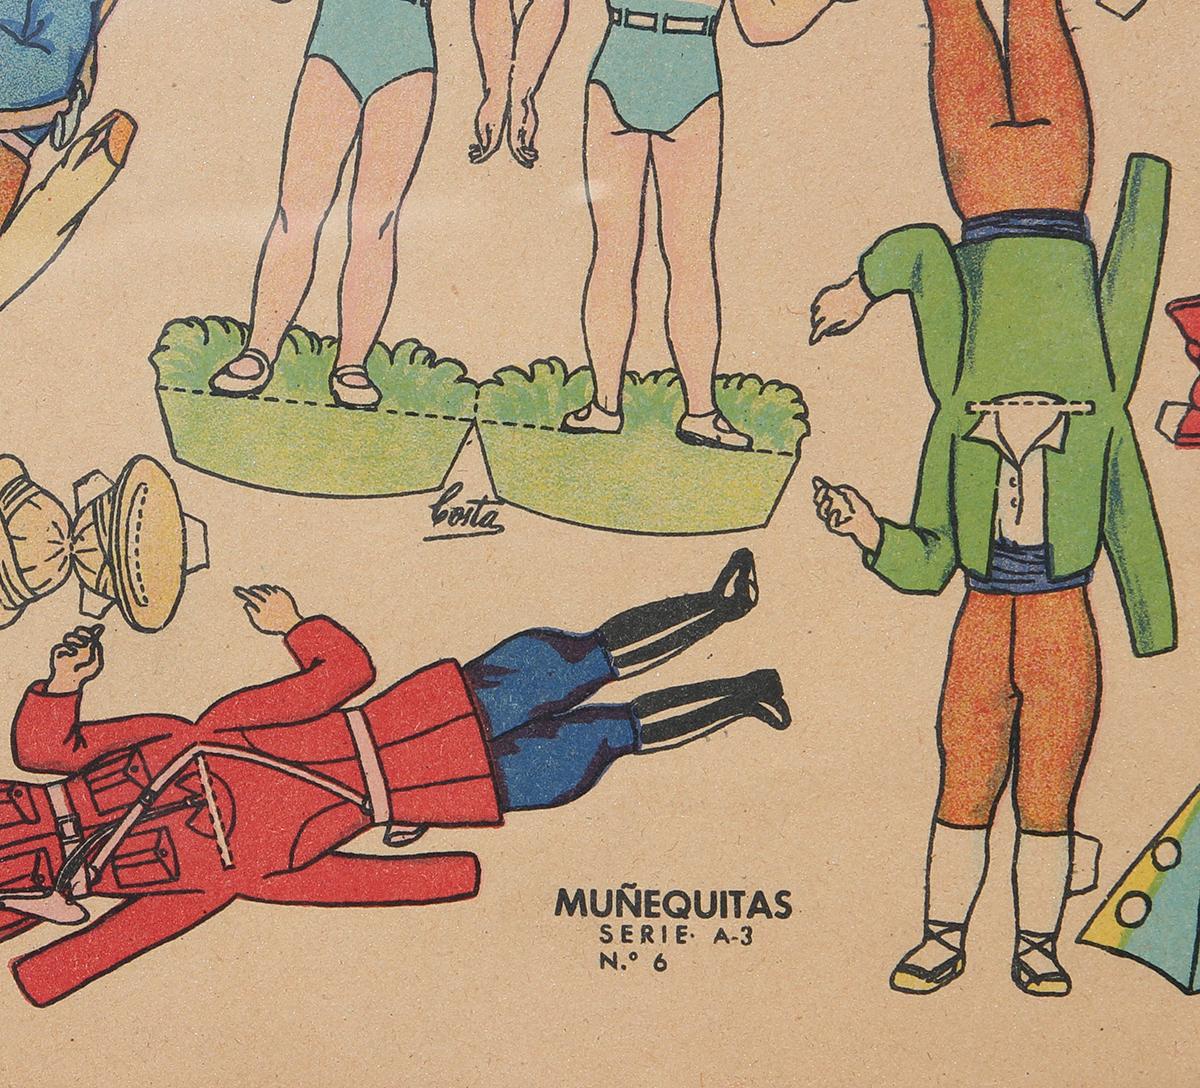 Colorful retro paper doll boy with various costumes by Kiki Recortables of Barcelona. The piece features a variety of costumes including a clown, a gladiator, a cowboy, and more. Titled 